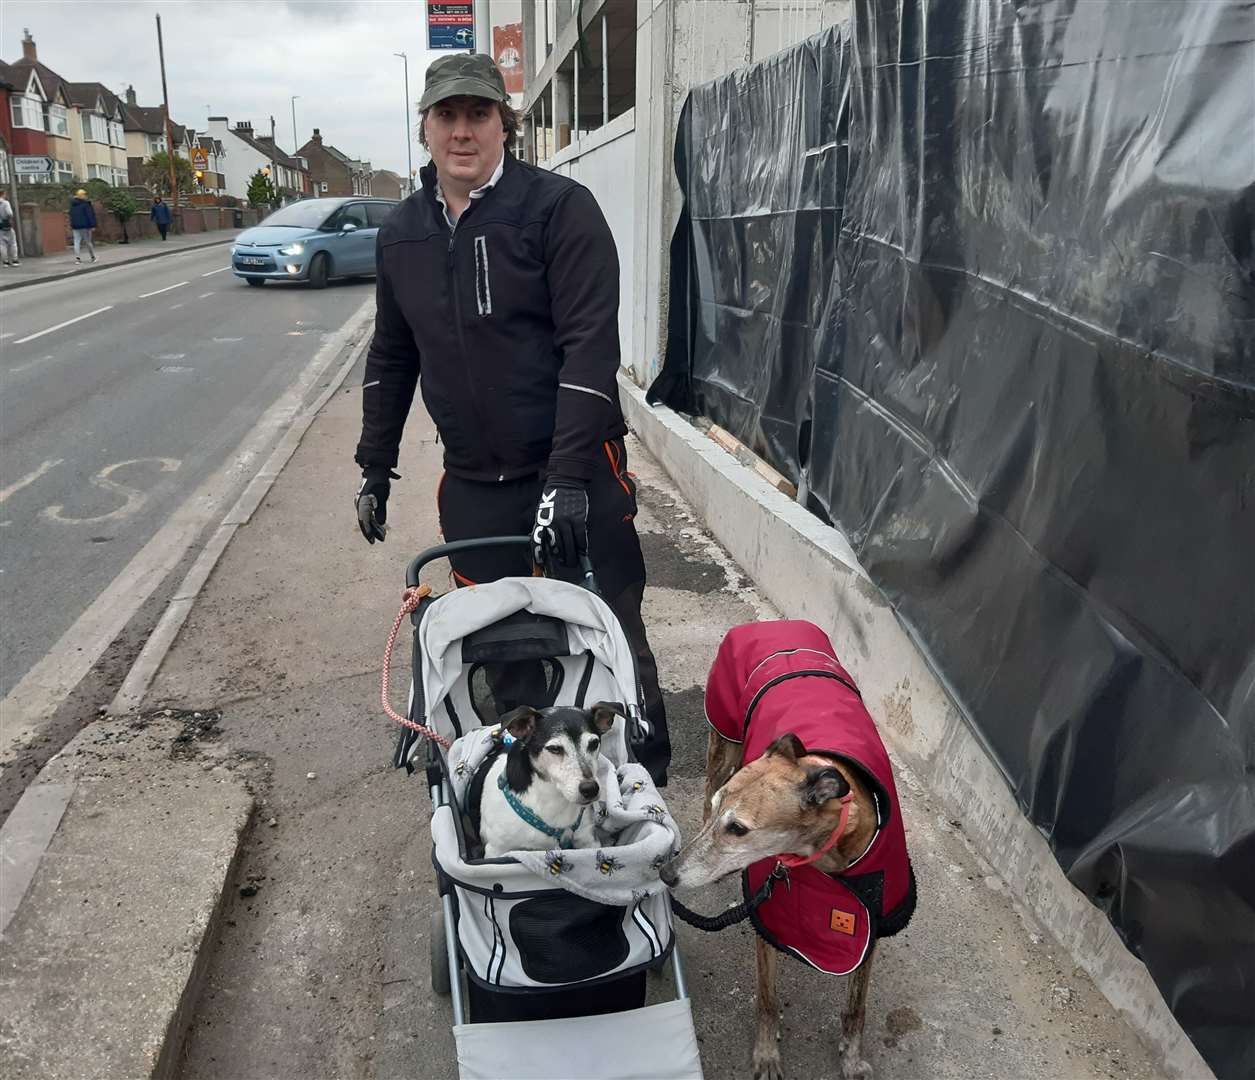 Gravesend resident Steven Bower says the bus stop has posed problems while out walking his dog in a pet stroller. Picture: Sean Delaney